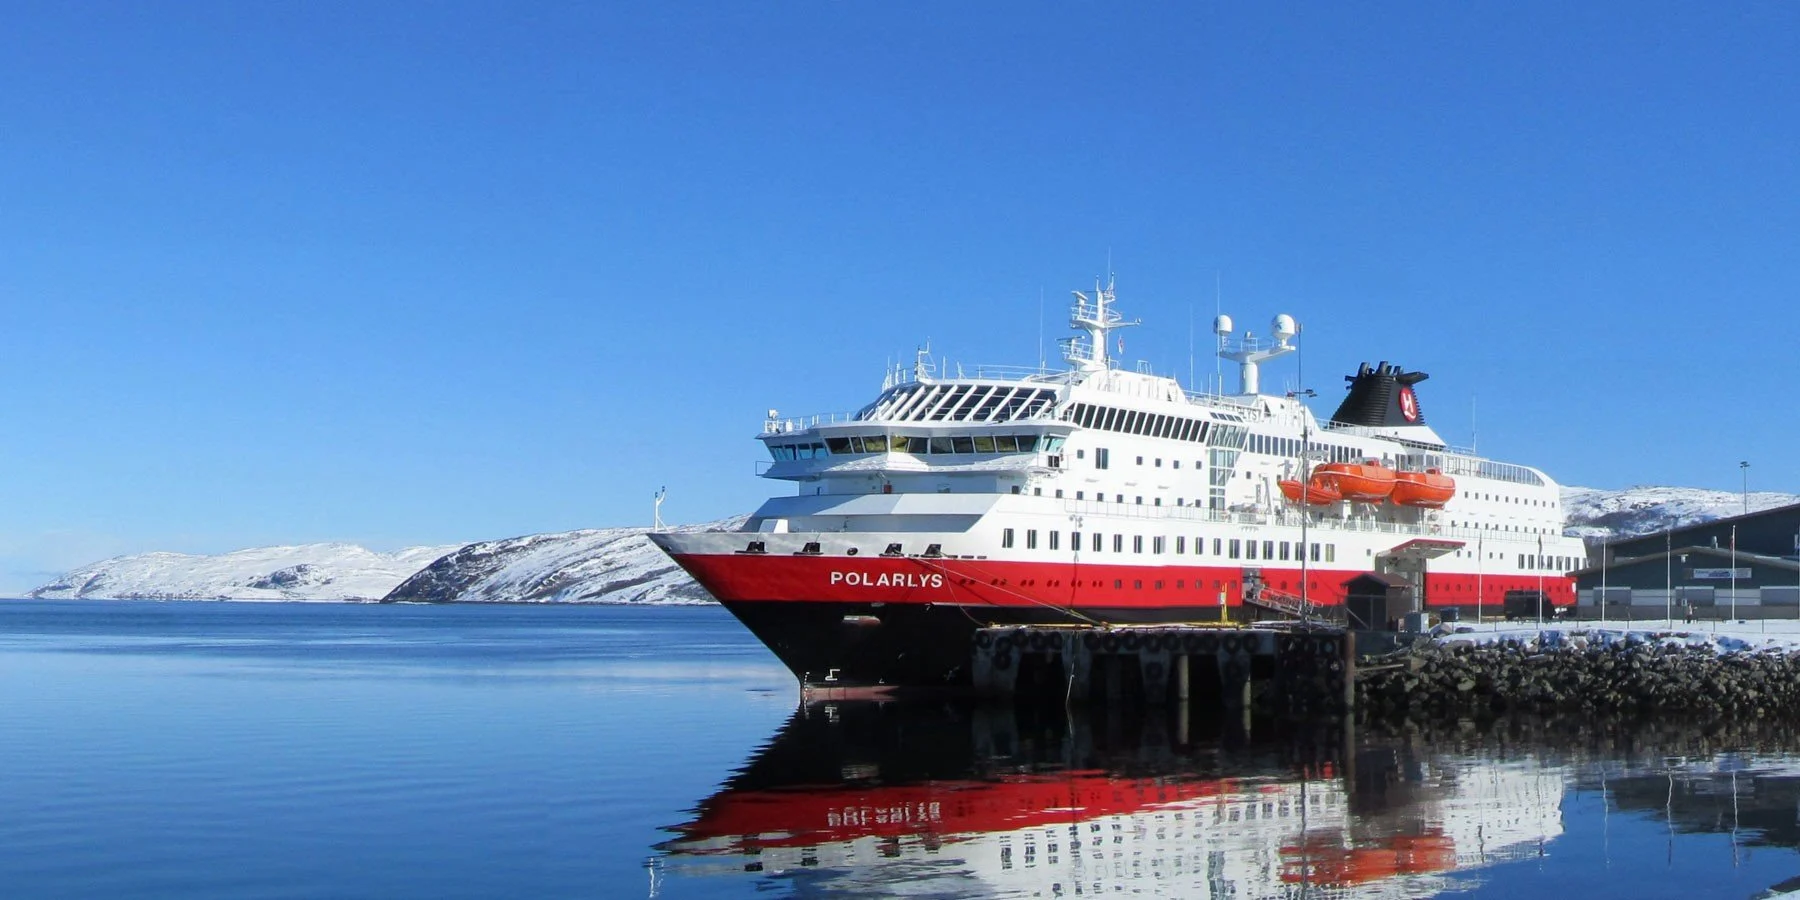 MS Polarlys at the port of Kirkenes